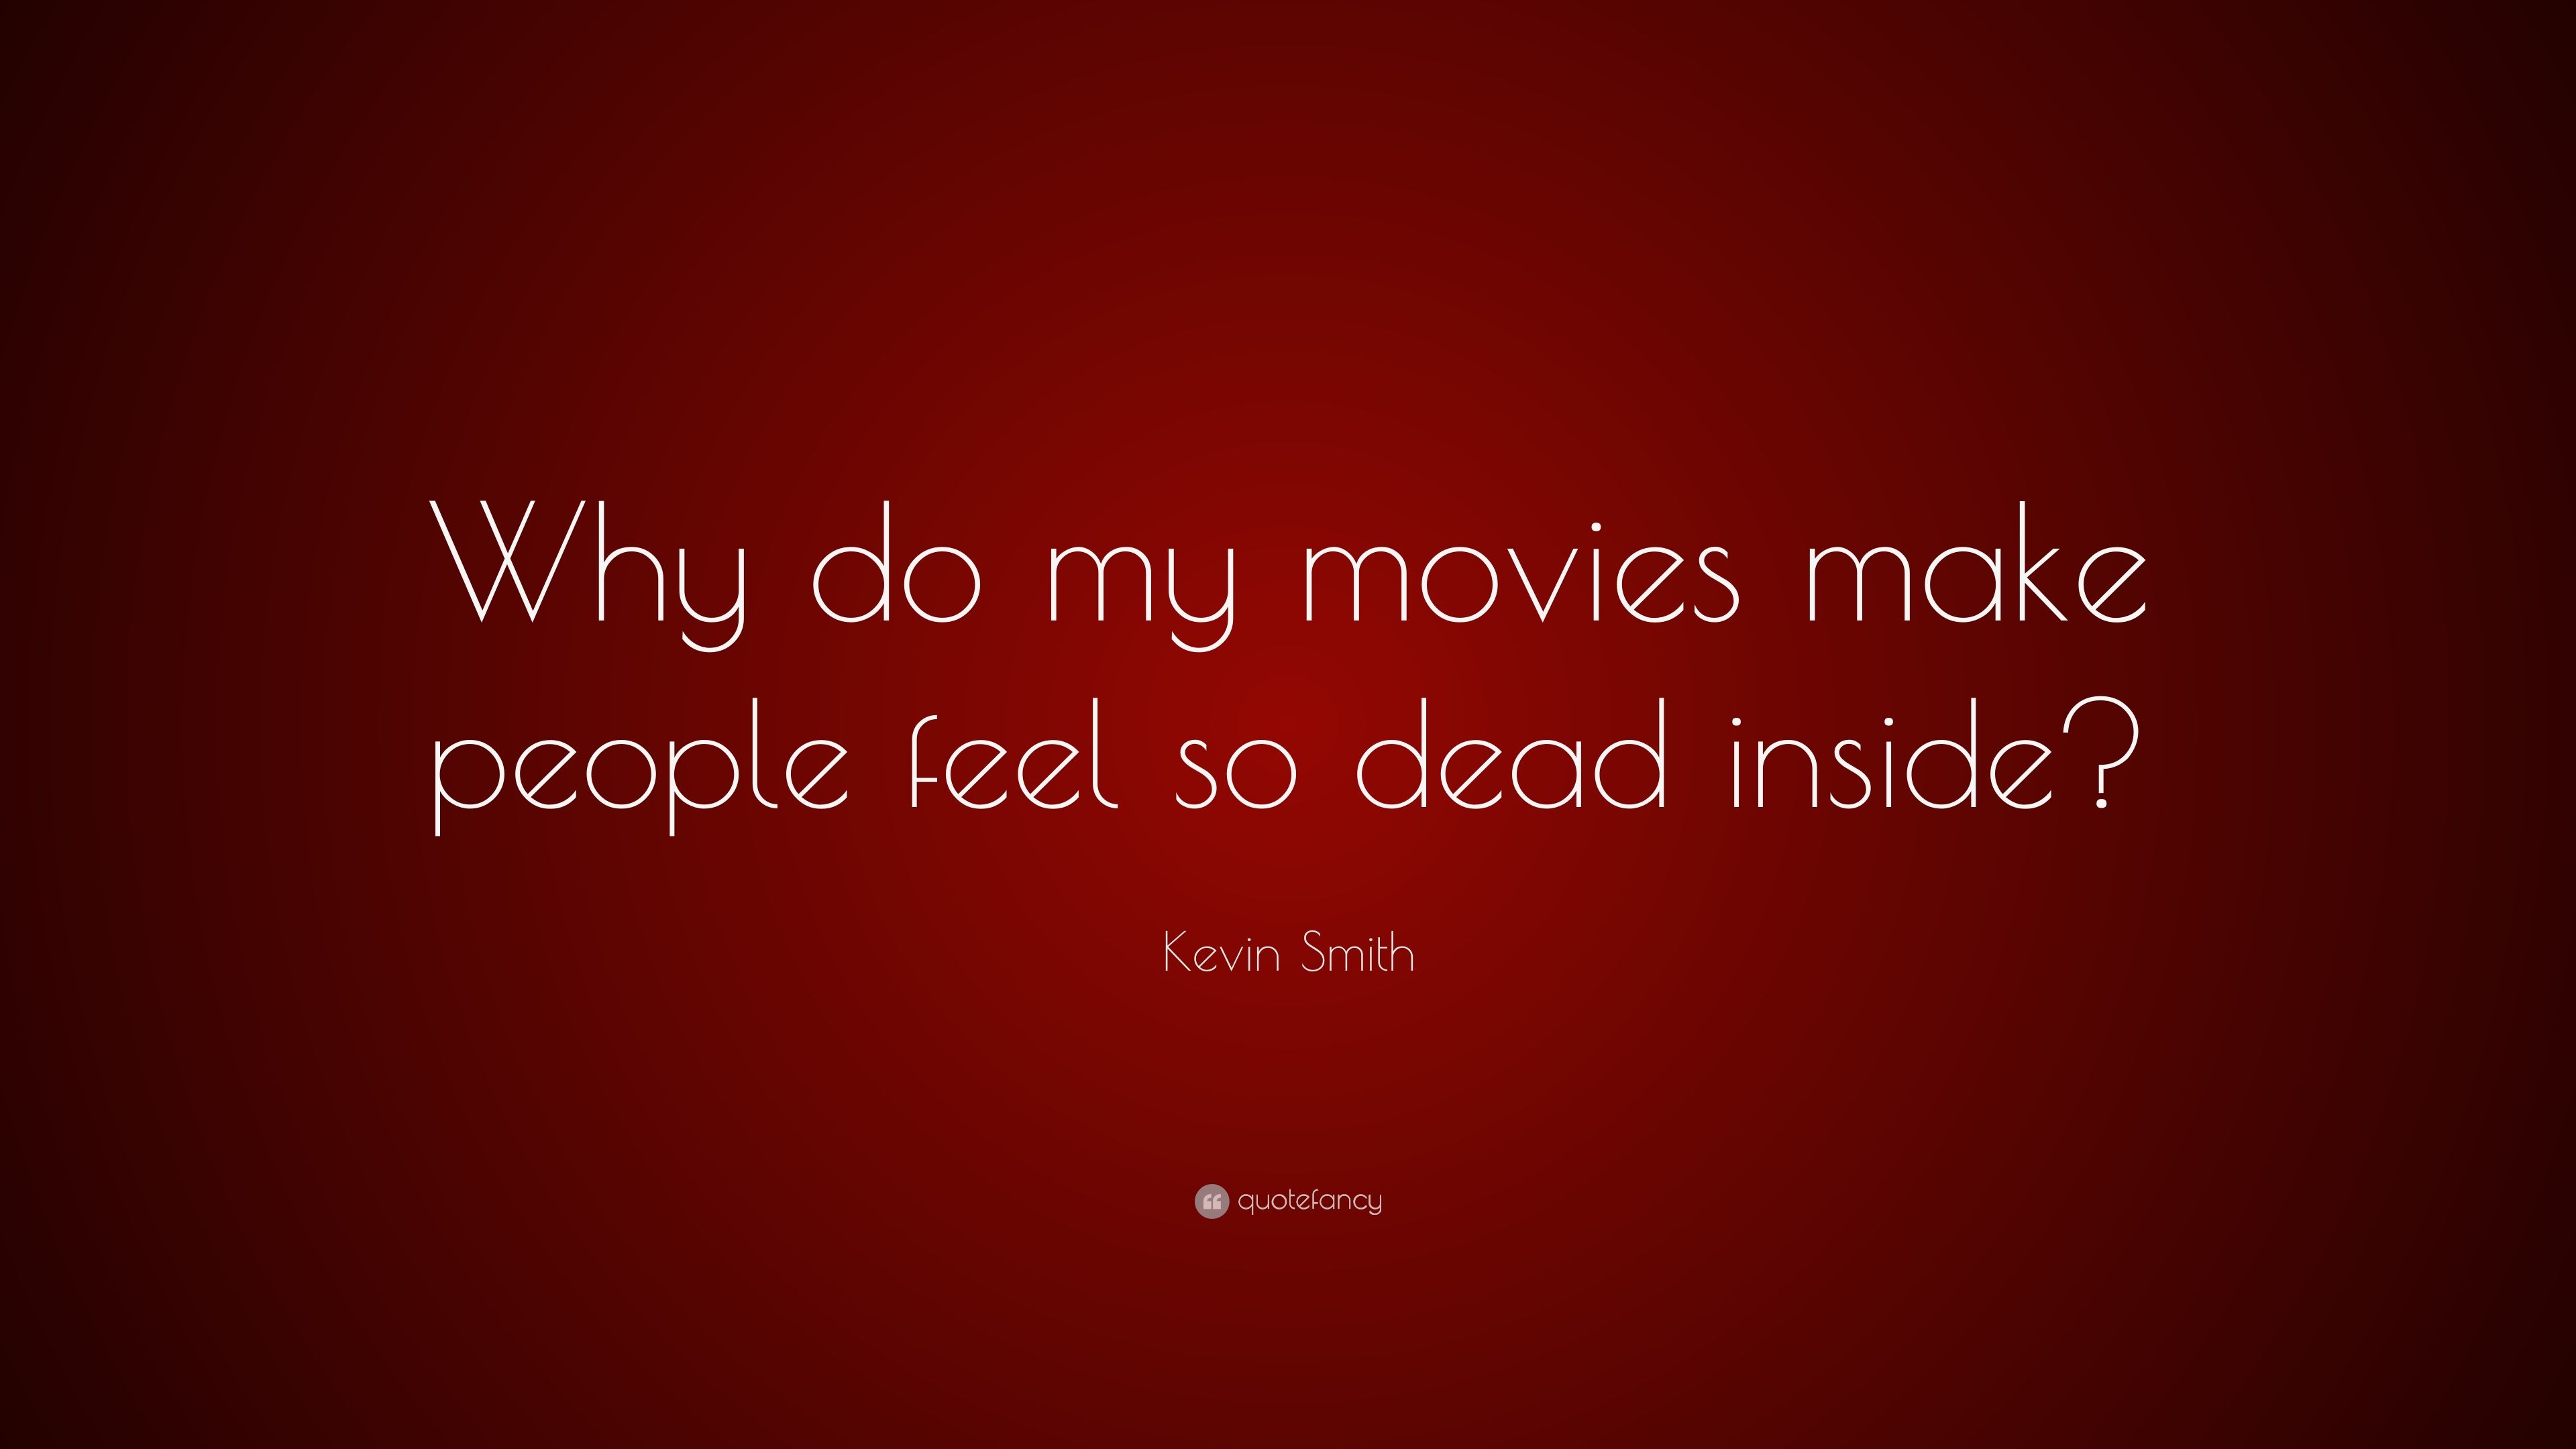 Kevin Smith Quote: “Why do my movies make people feel so dead